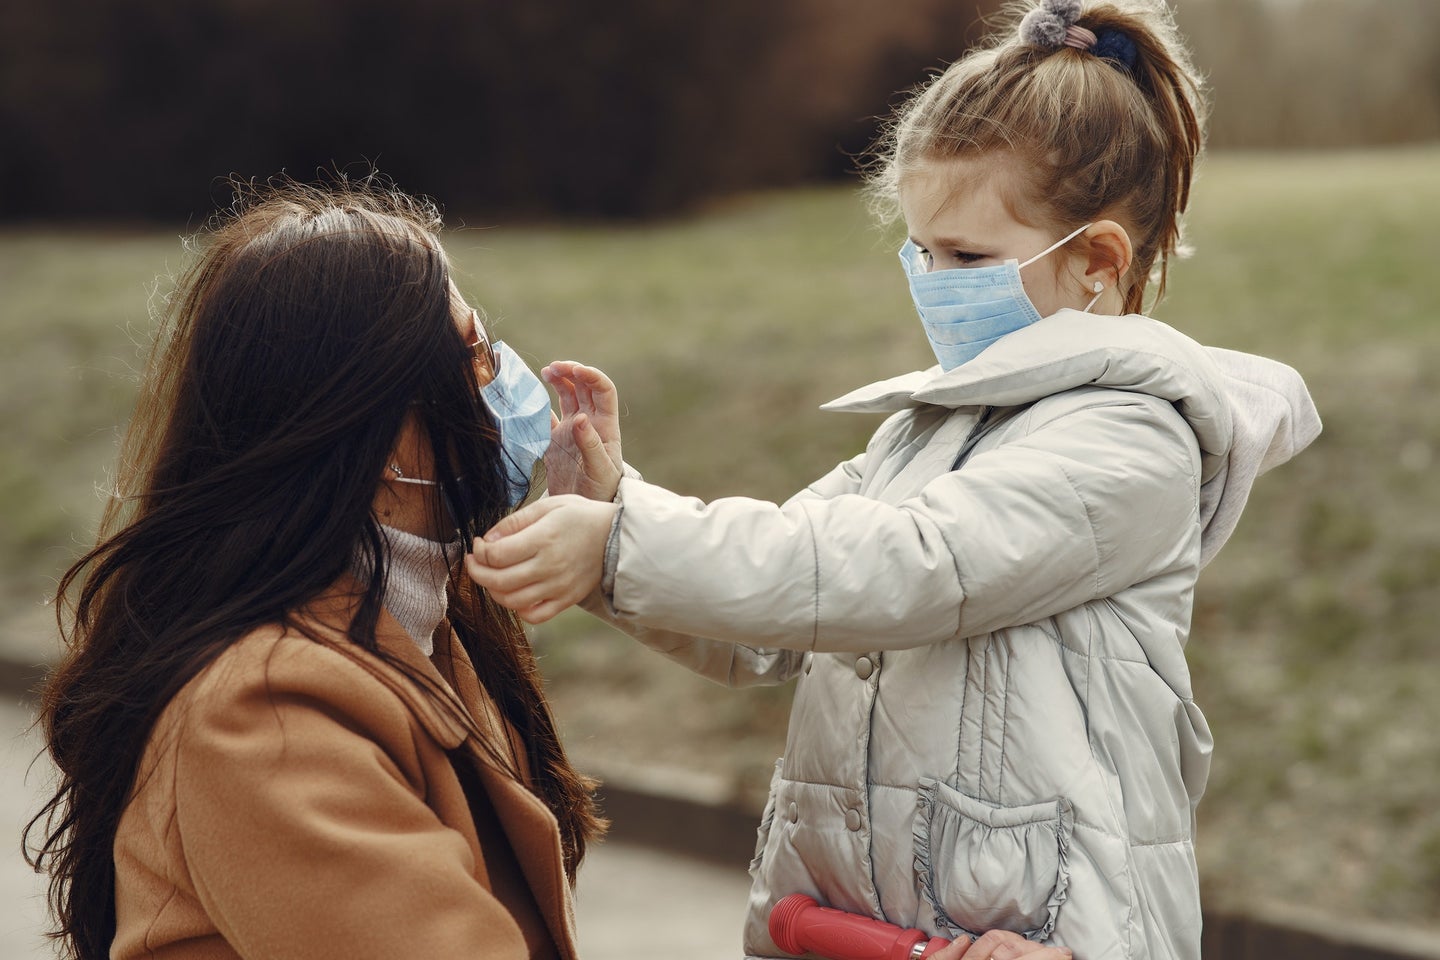 A child in a medical mask touches the face of a woman in a medical mask